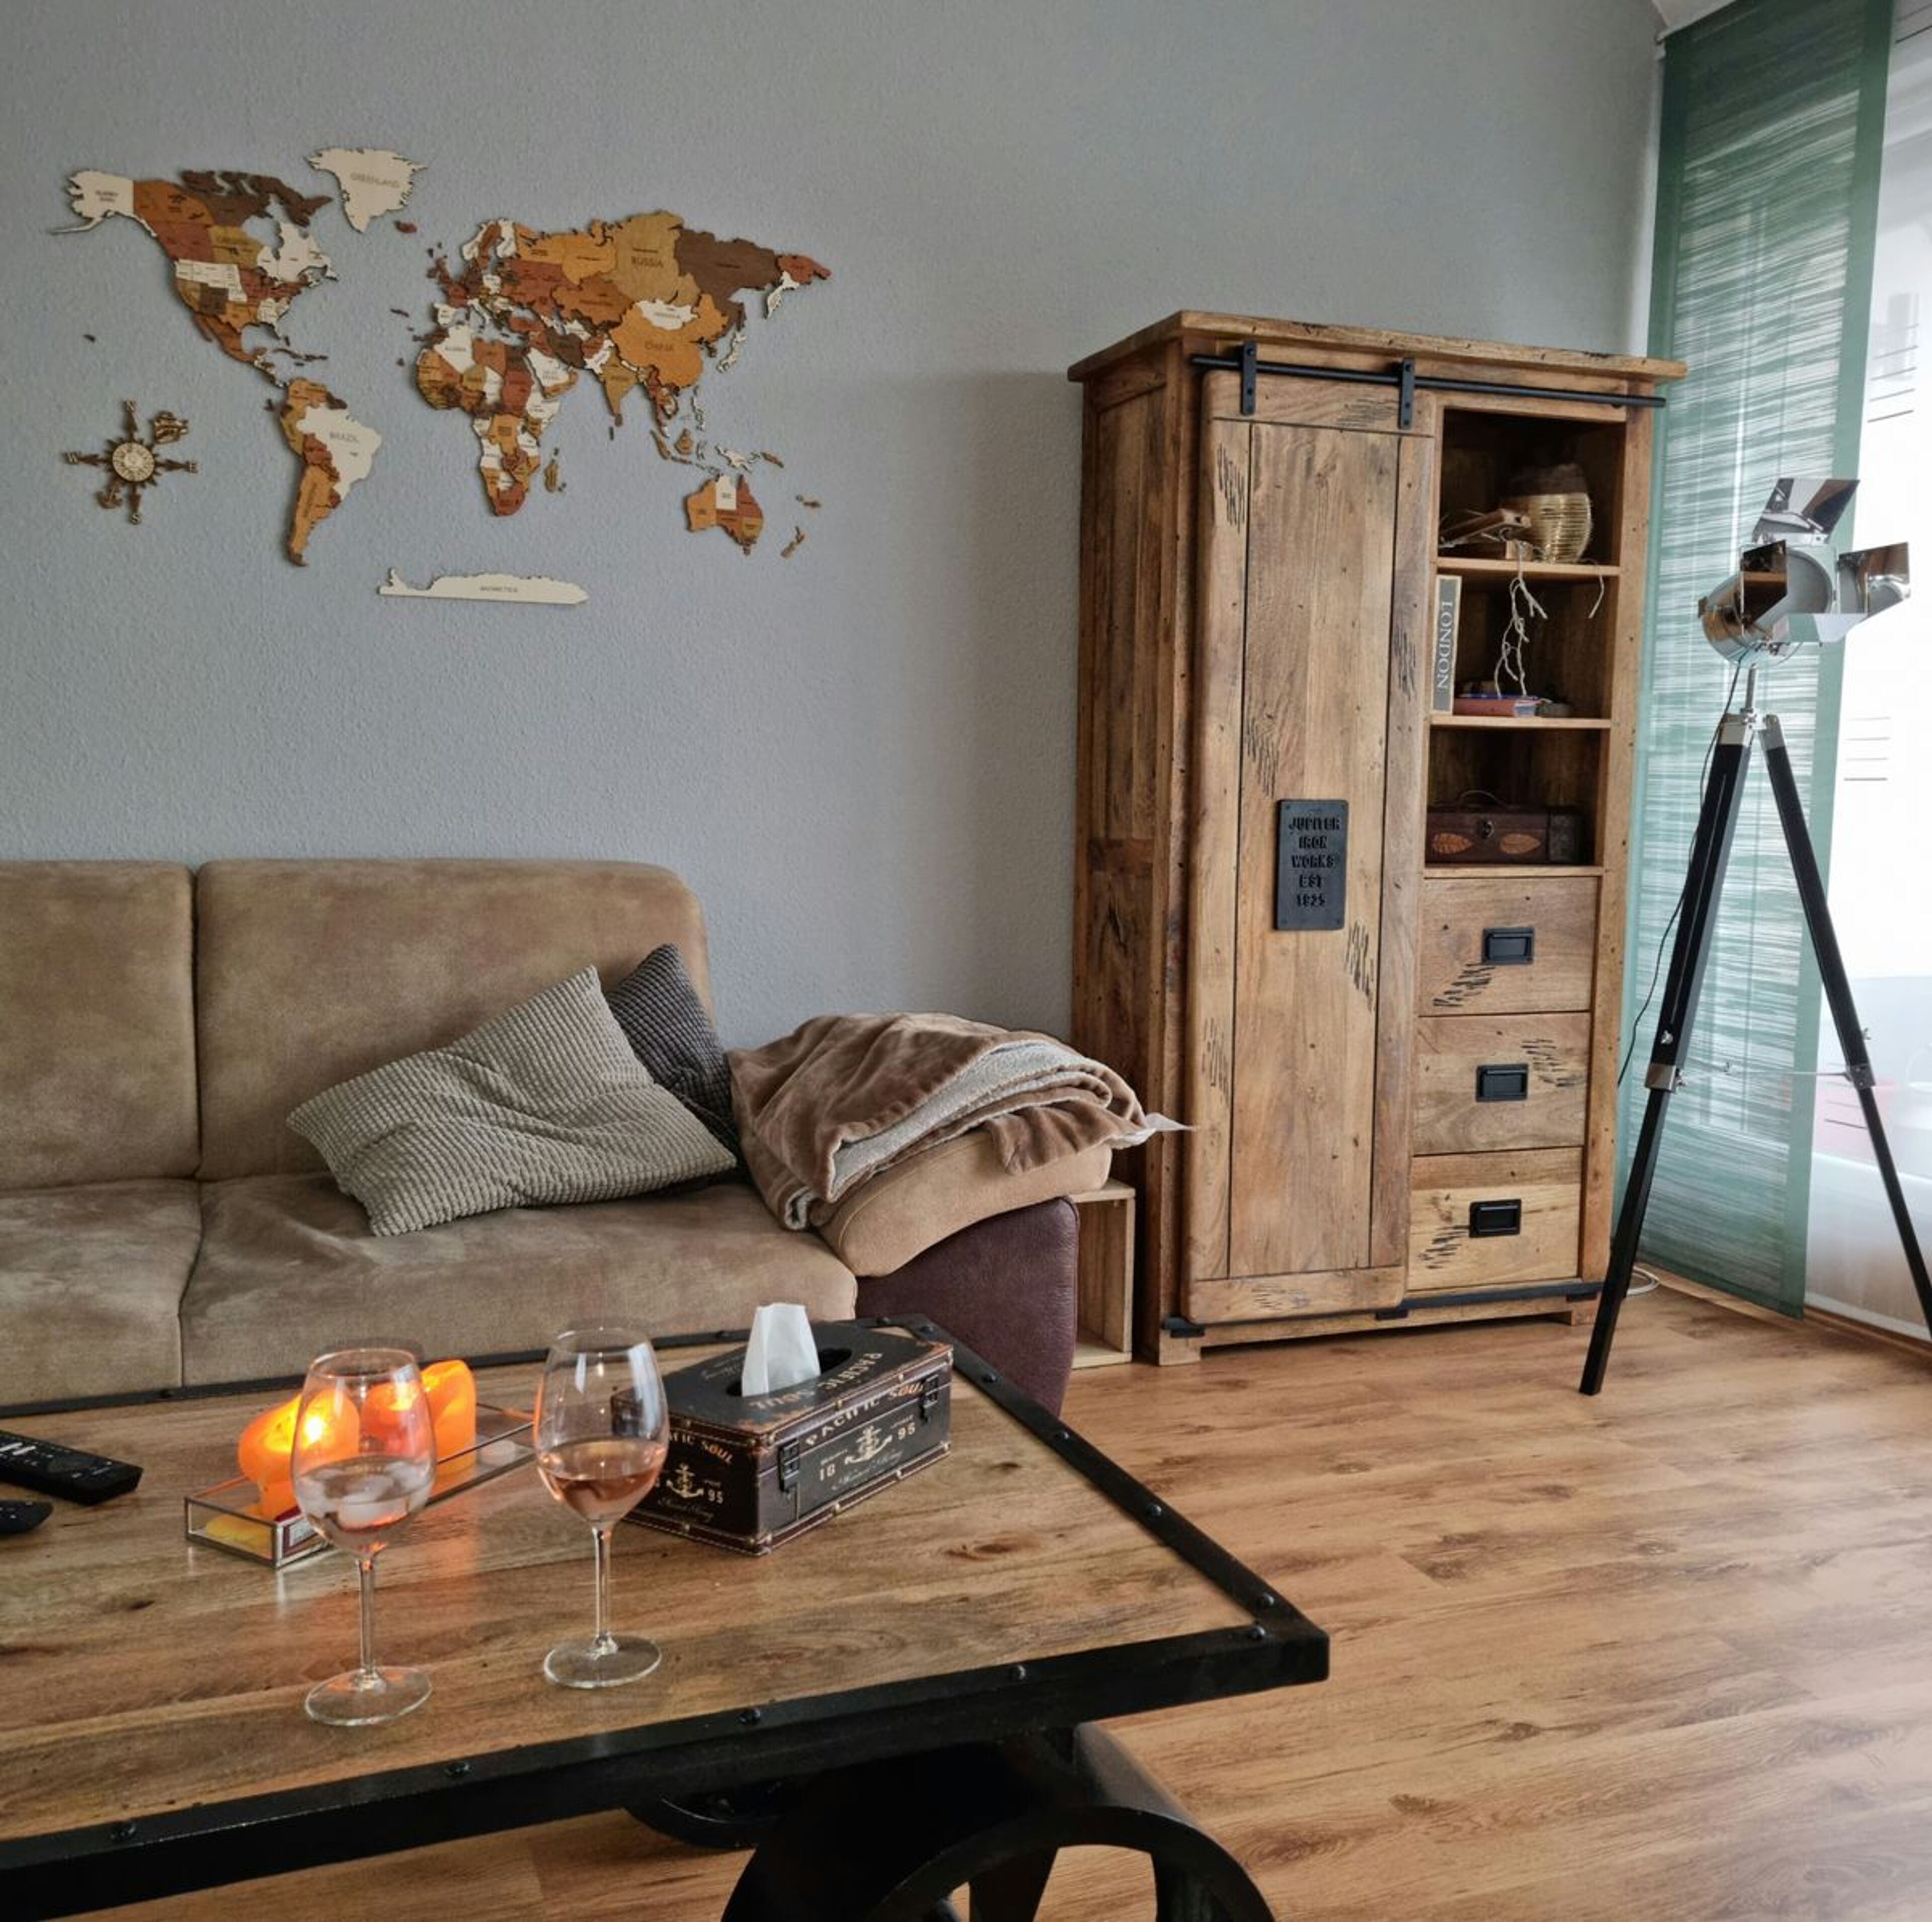 Review for Wooden World Map Wall Decoration - image from Daniela